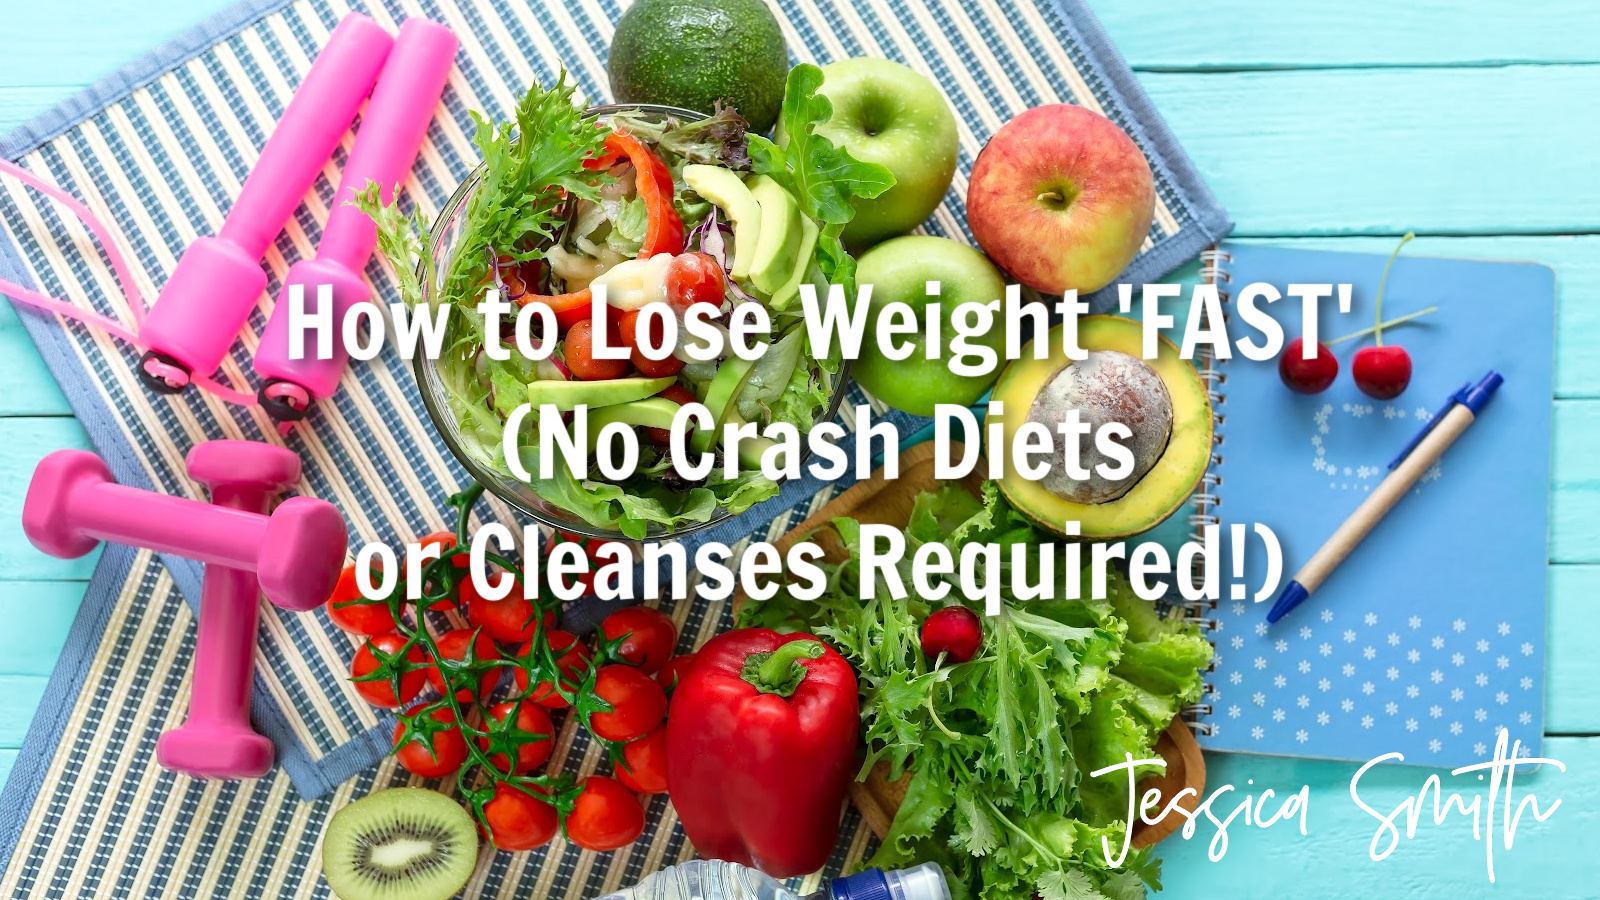 How to Lose Weight ‘Fast’ (No Crash Diets or Cleanses Required!): 5 Tips to Help You Reach Your Healthy Weight Faster